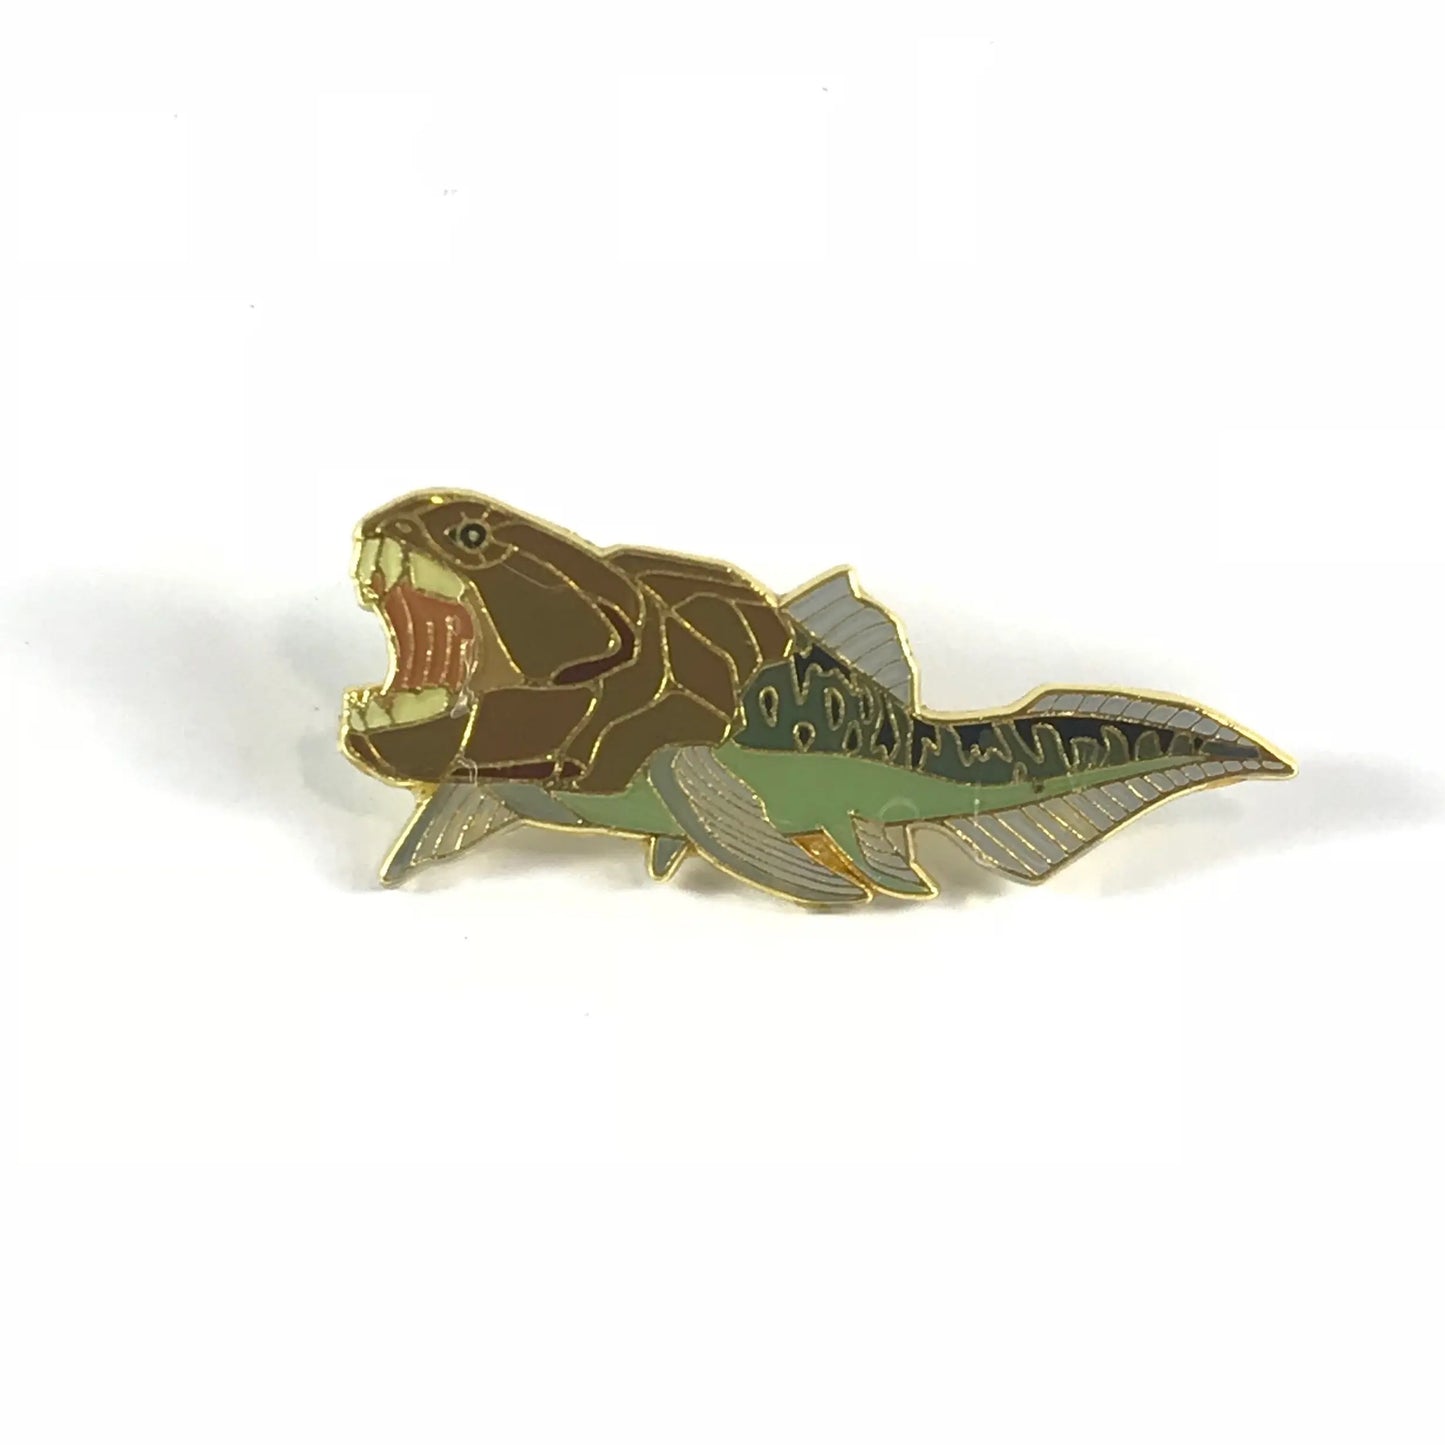 Dunkleosteus Enamel Pin - THE STEMCELL SCIENCE SHOP